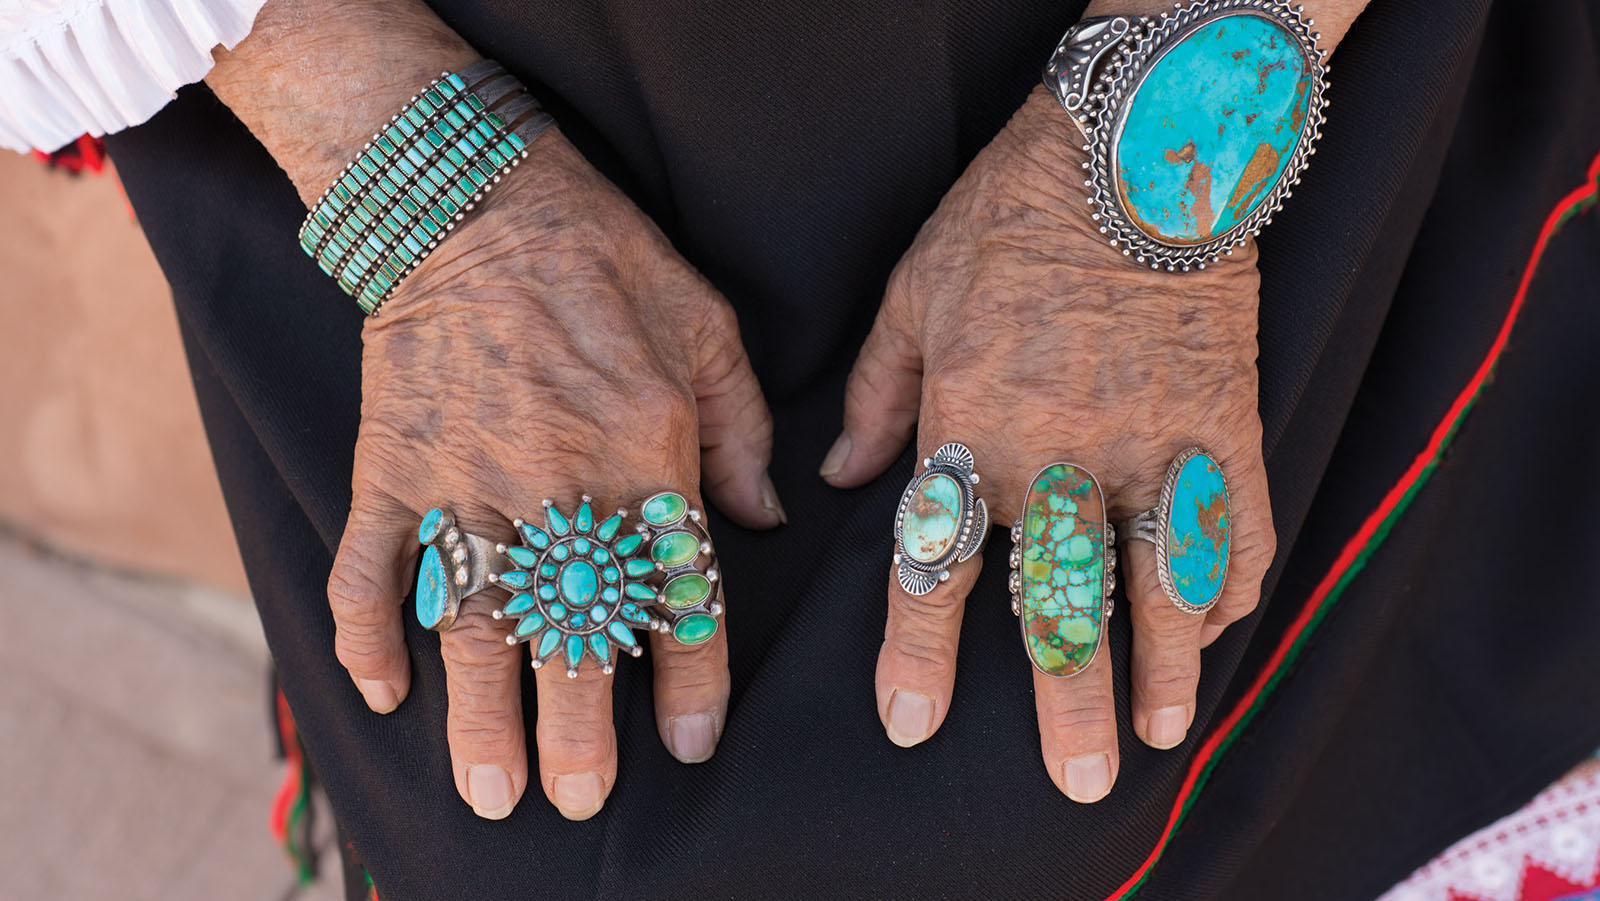 These pieces of jewelry date from the 1910s to the present and show turquoise at its best. Photo by Kitty Leaken